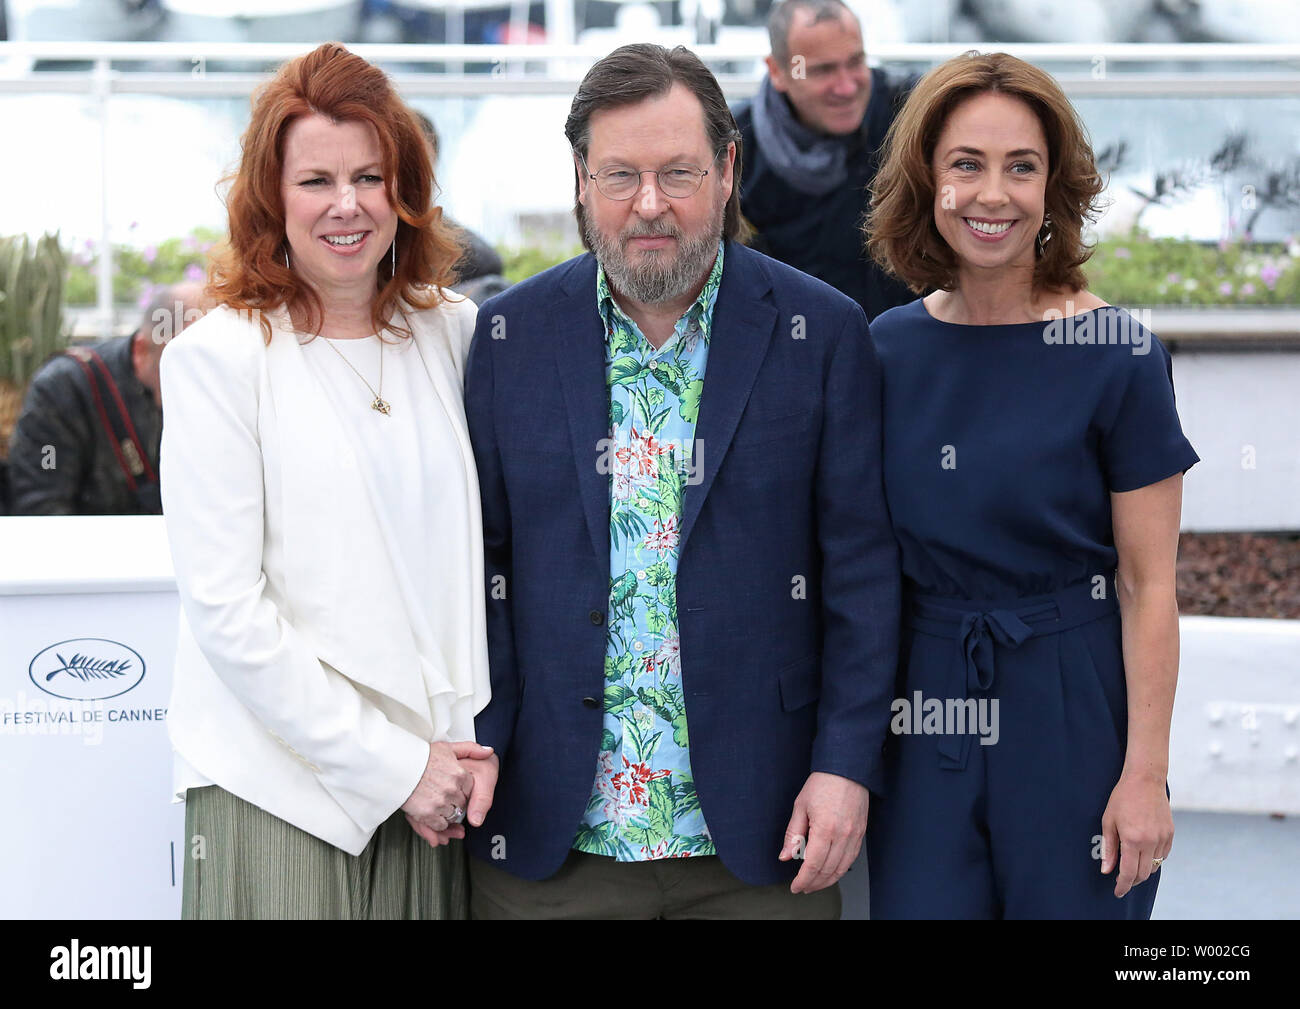 Siobhan Fallon Hogan (L), Lars von Trier (C) and Sofie Grabol arrive at a  photocall for the film "The House That Jack Built" during the 71st annual  Cannes International Film Festival in